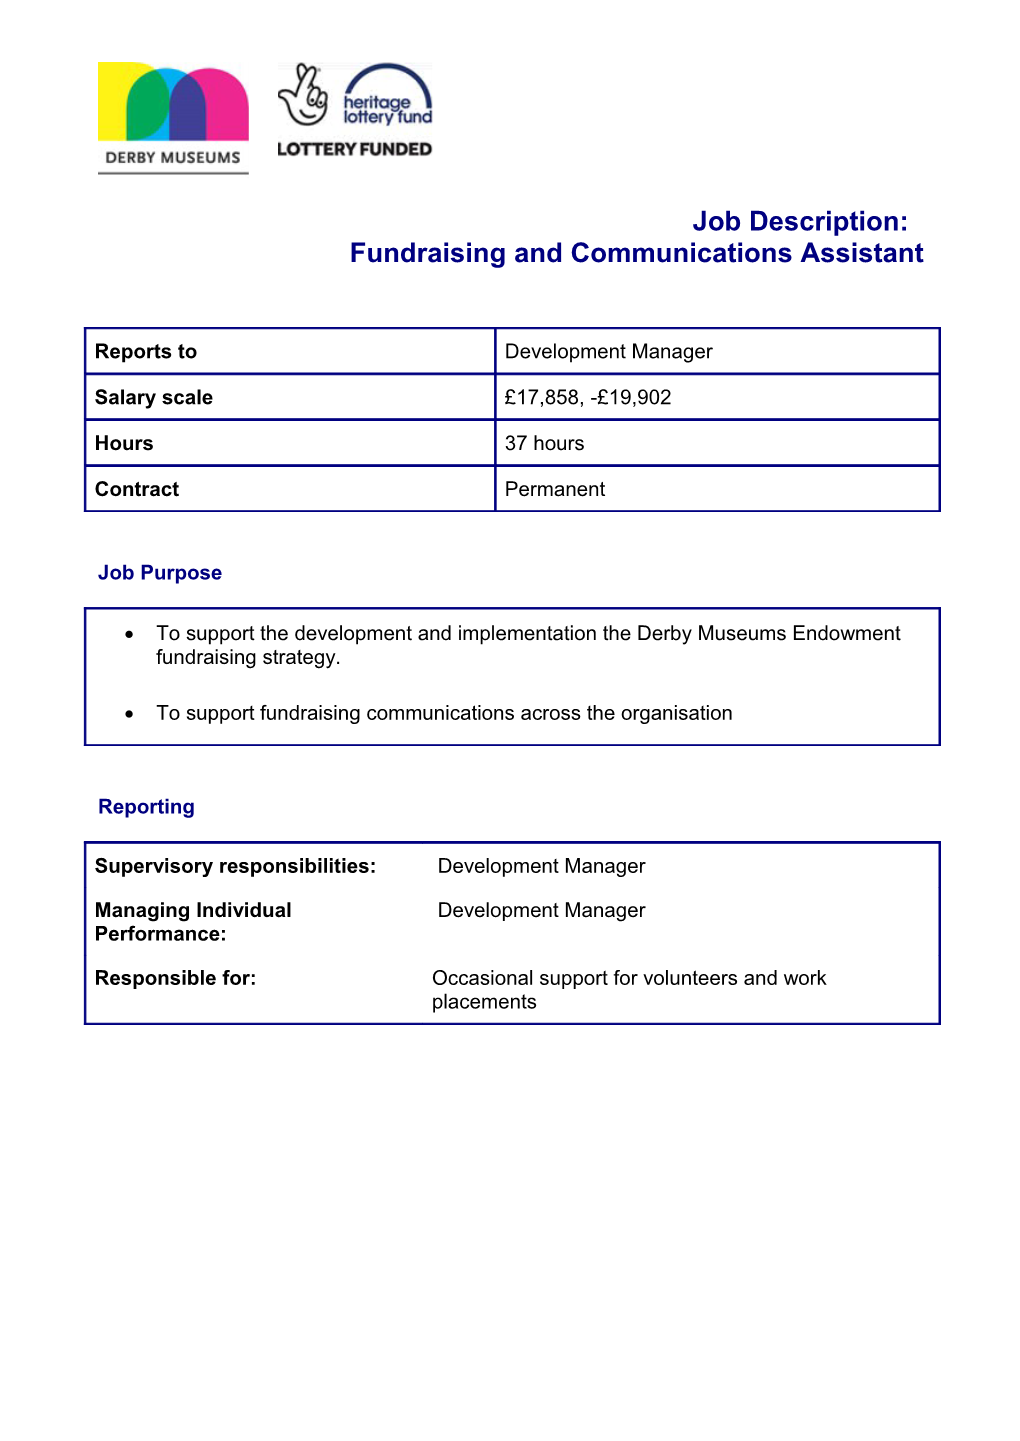 Fundraising and Communications Assistant